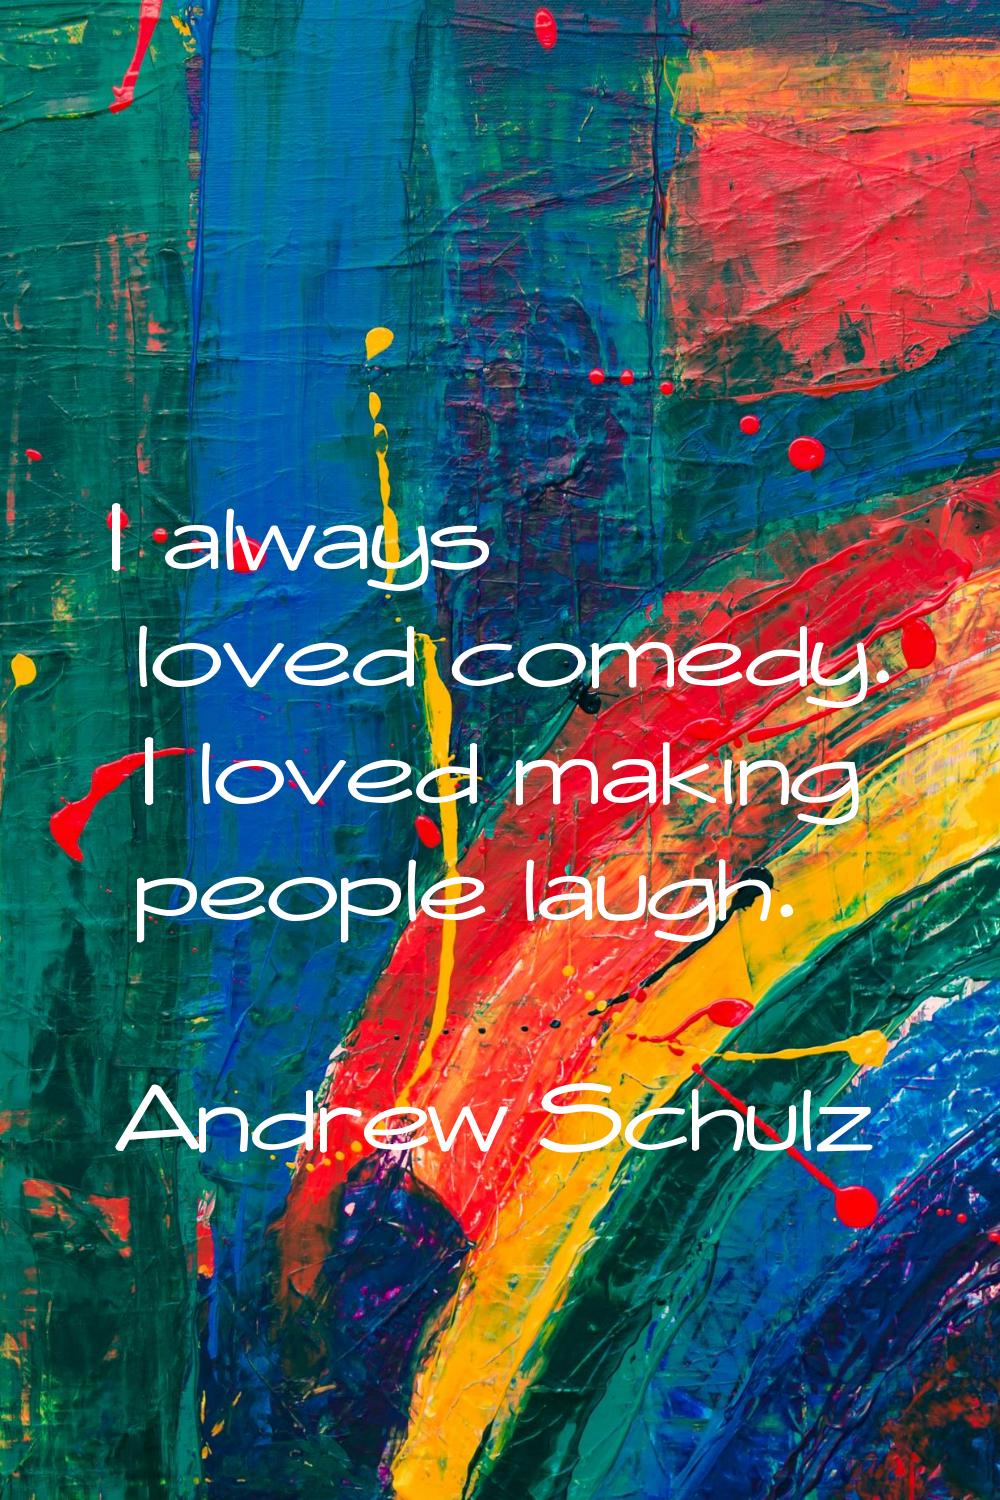 I always loved comedy. I loved making people laugh.